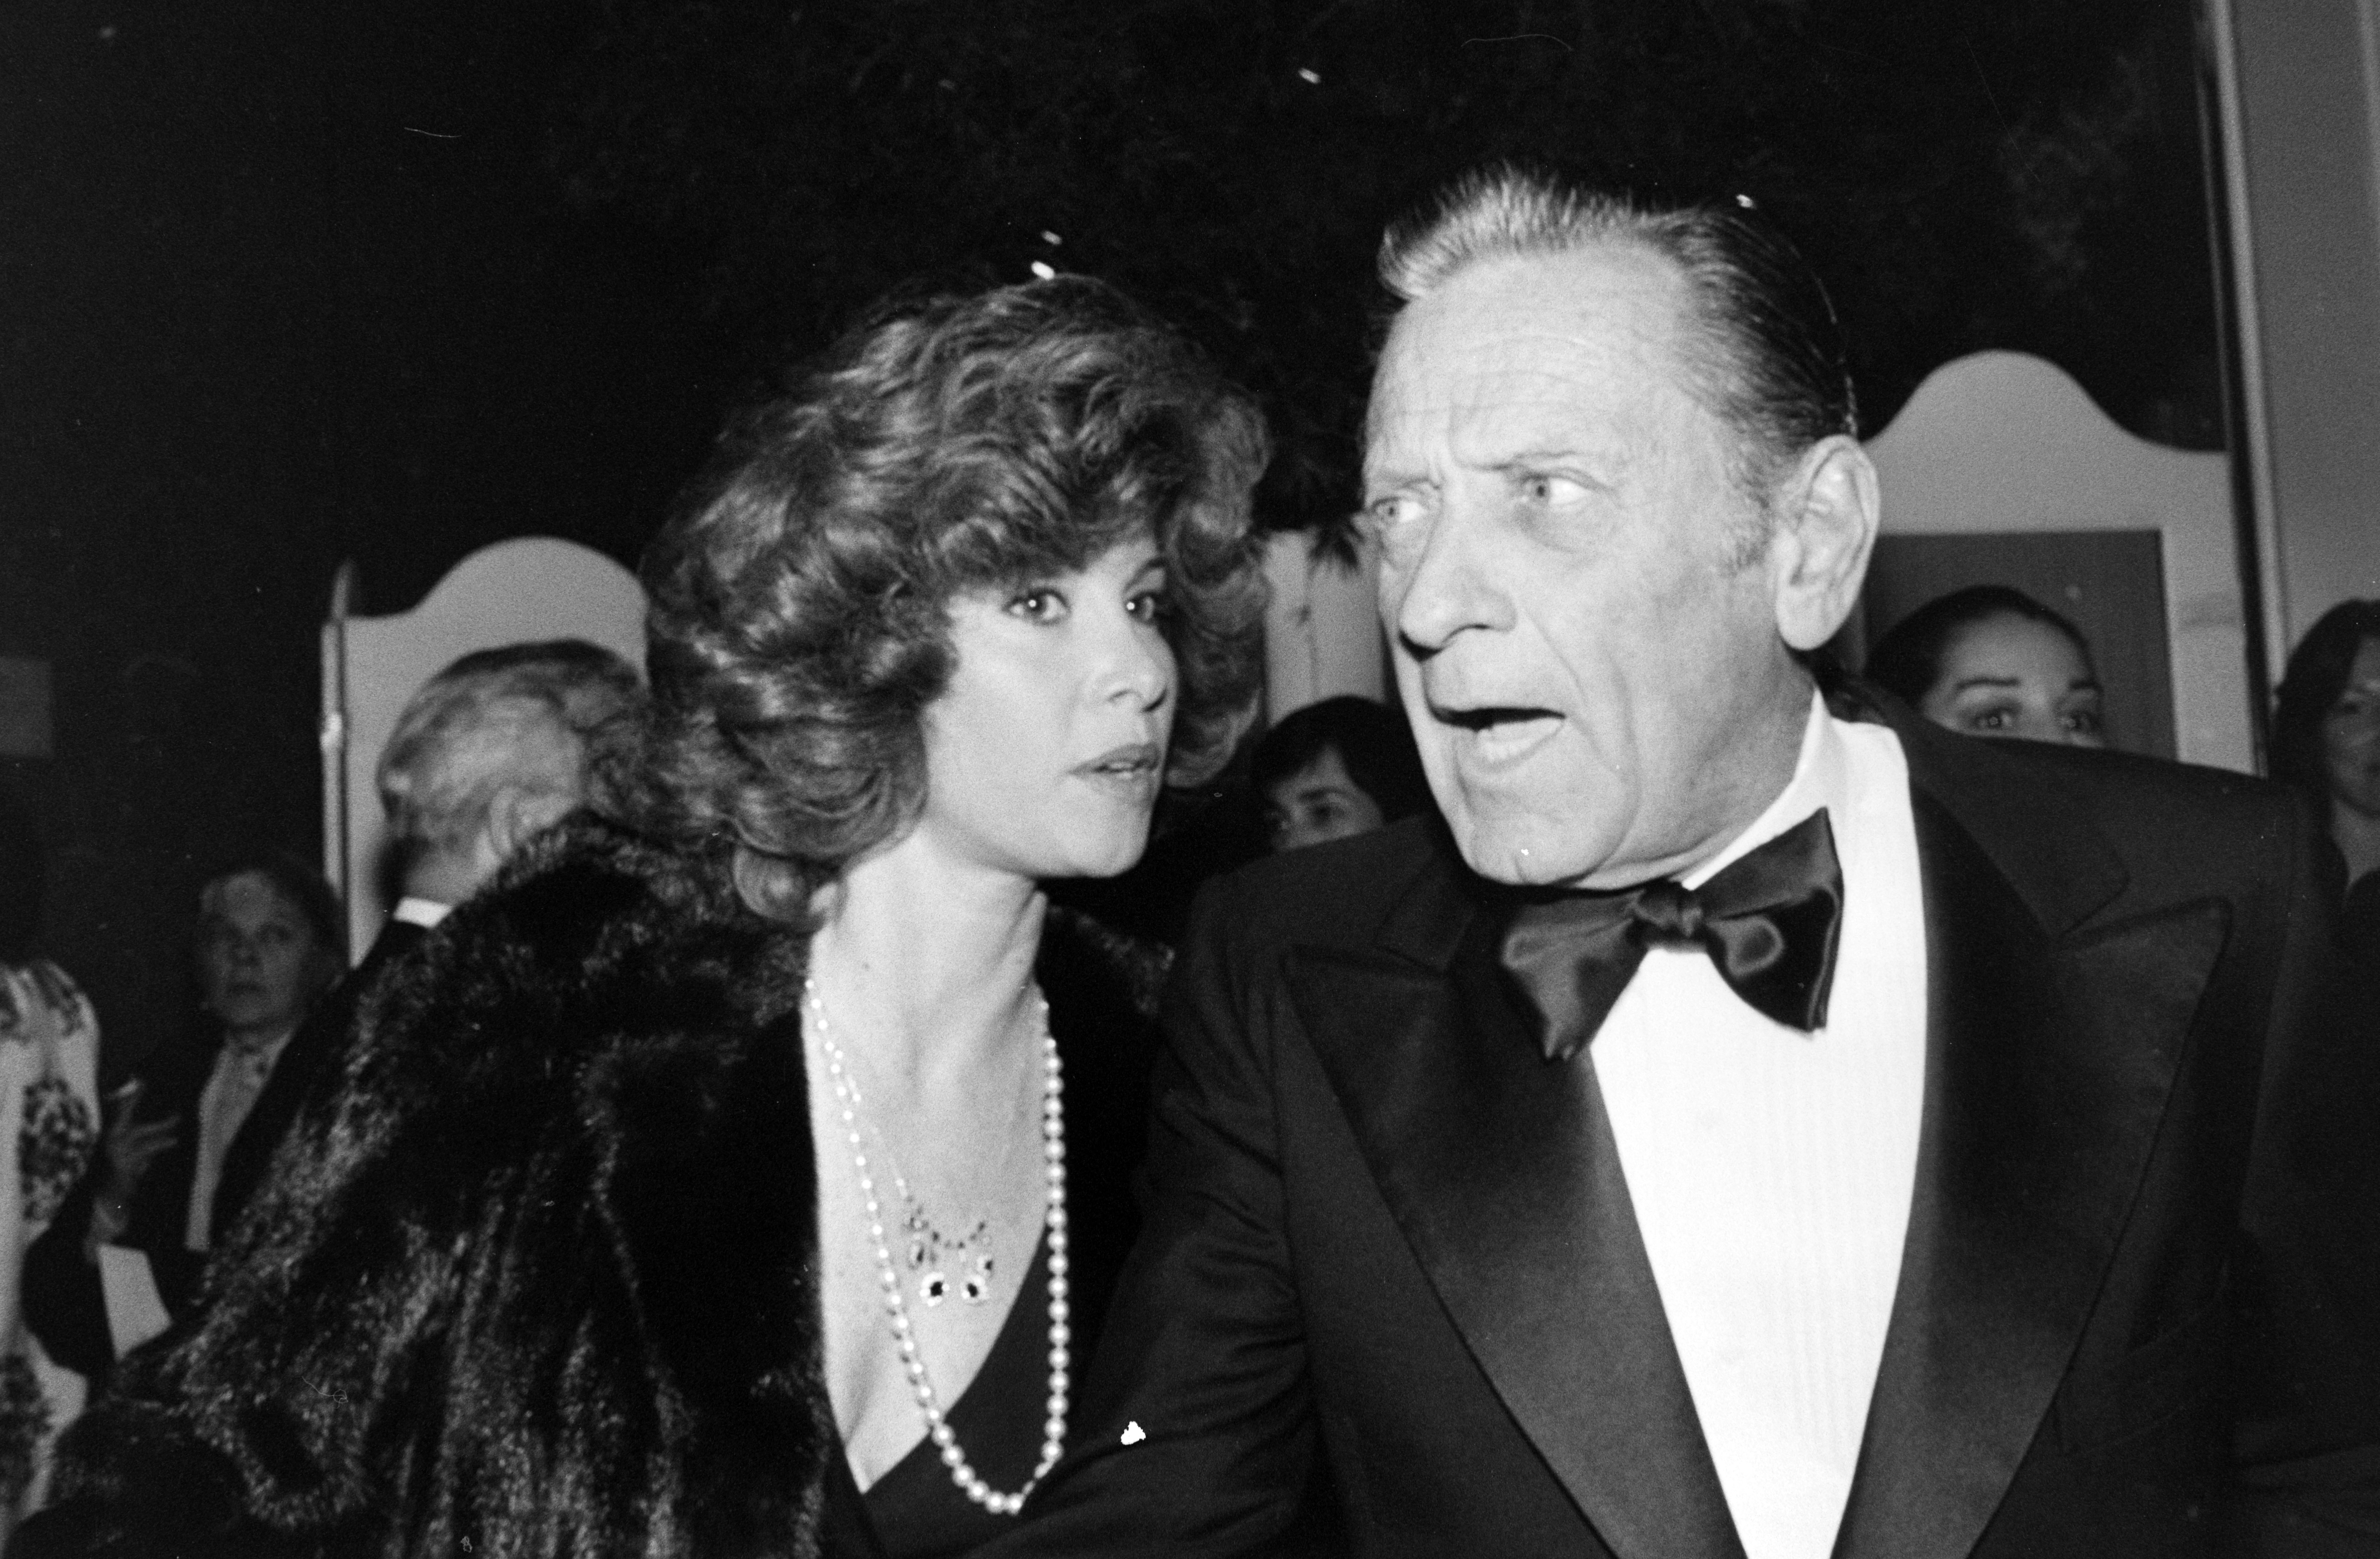 Stefanie Powers and William Holden attend an American Film Institute event at the Beverly Hilton Hotel on March 3, 1980 in Beverly Hills, California. | Source: Getty Images